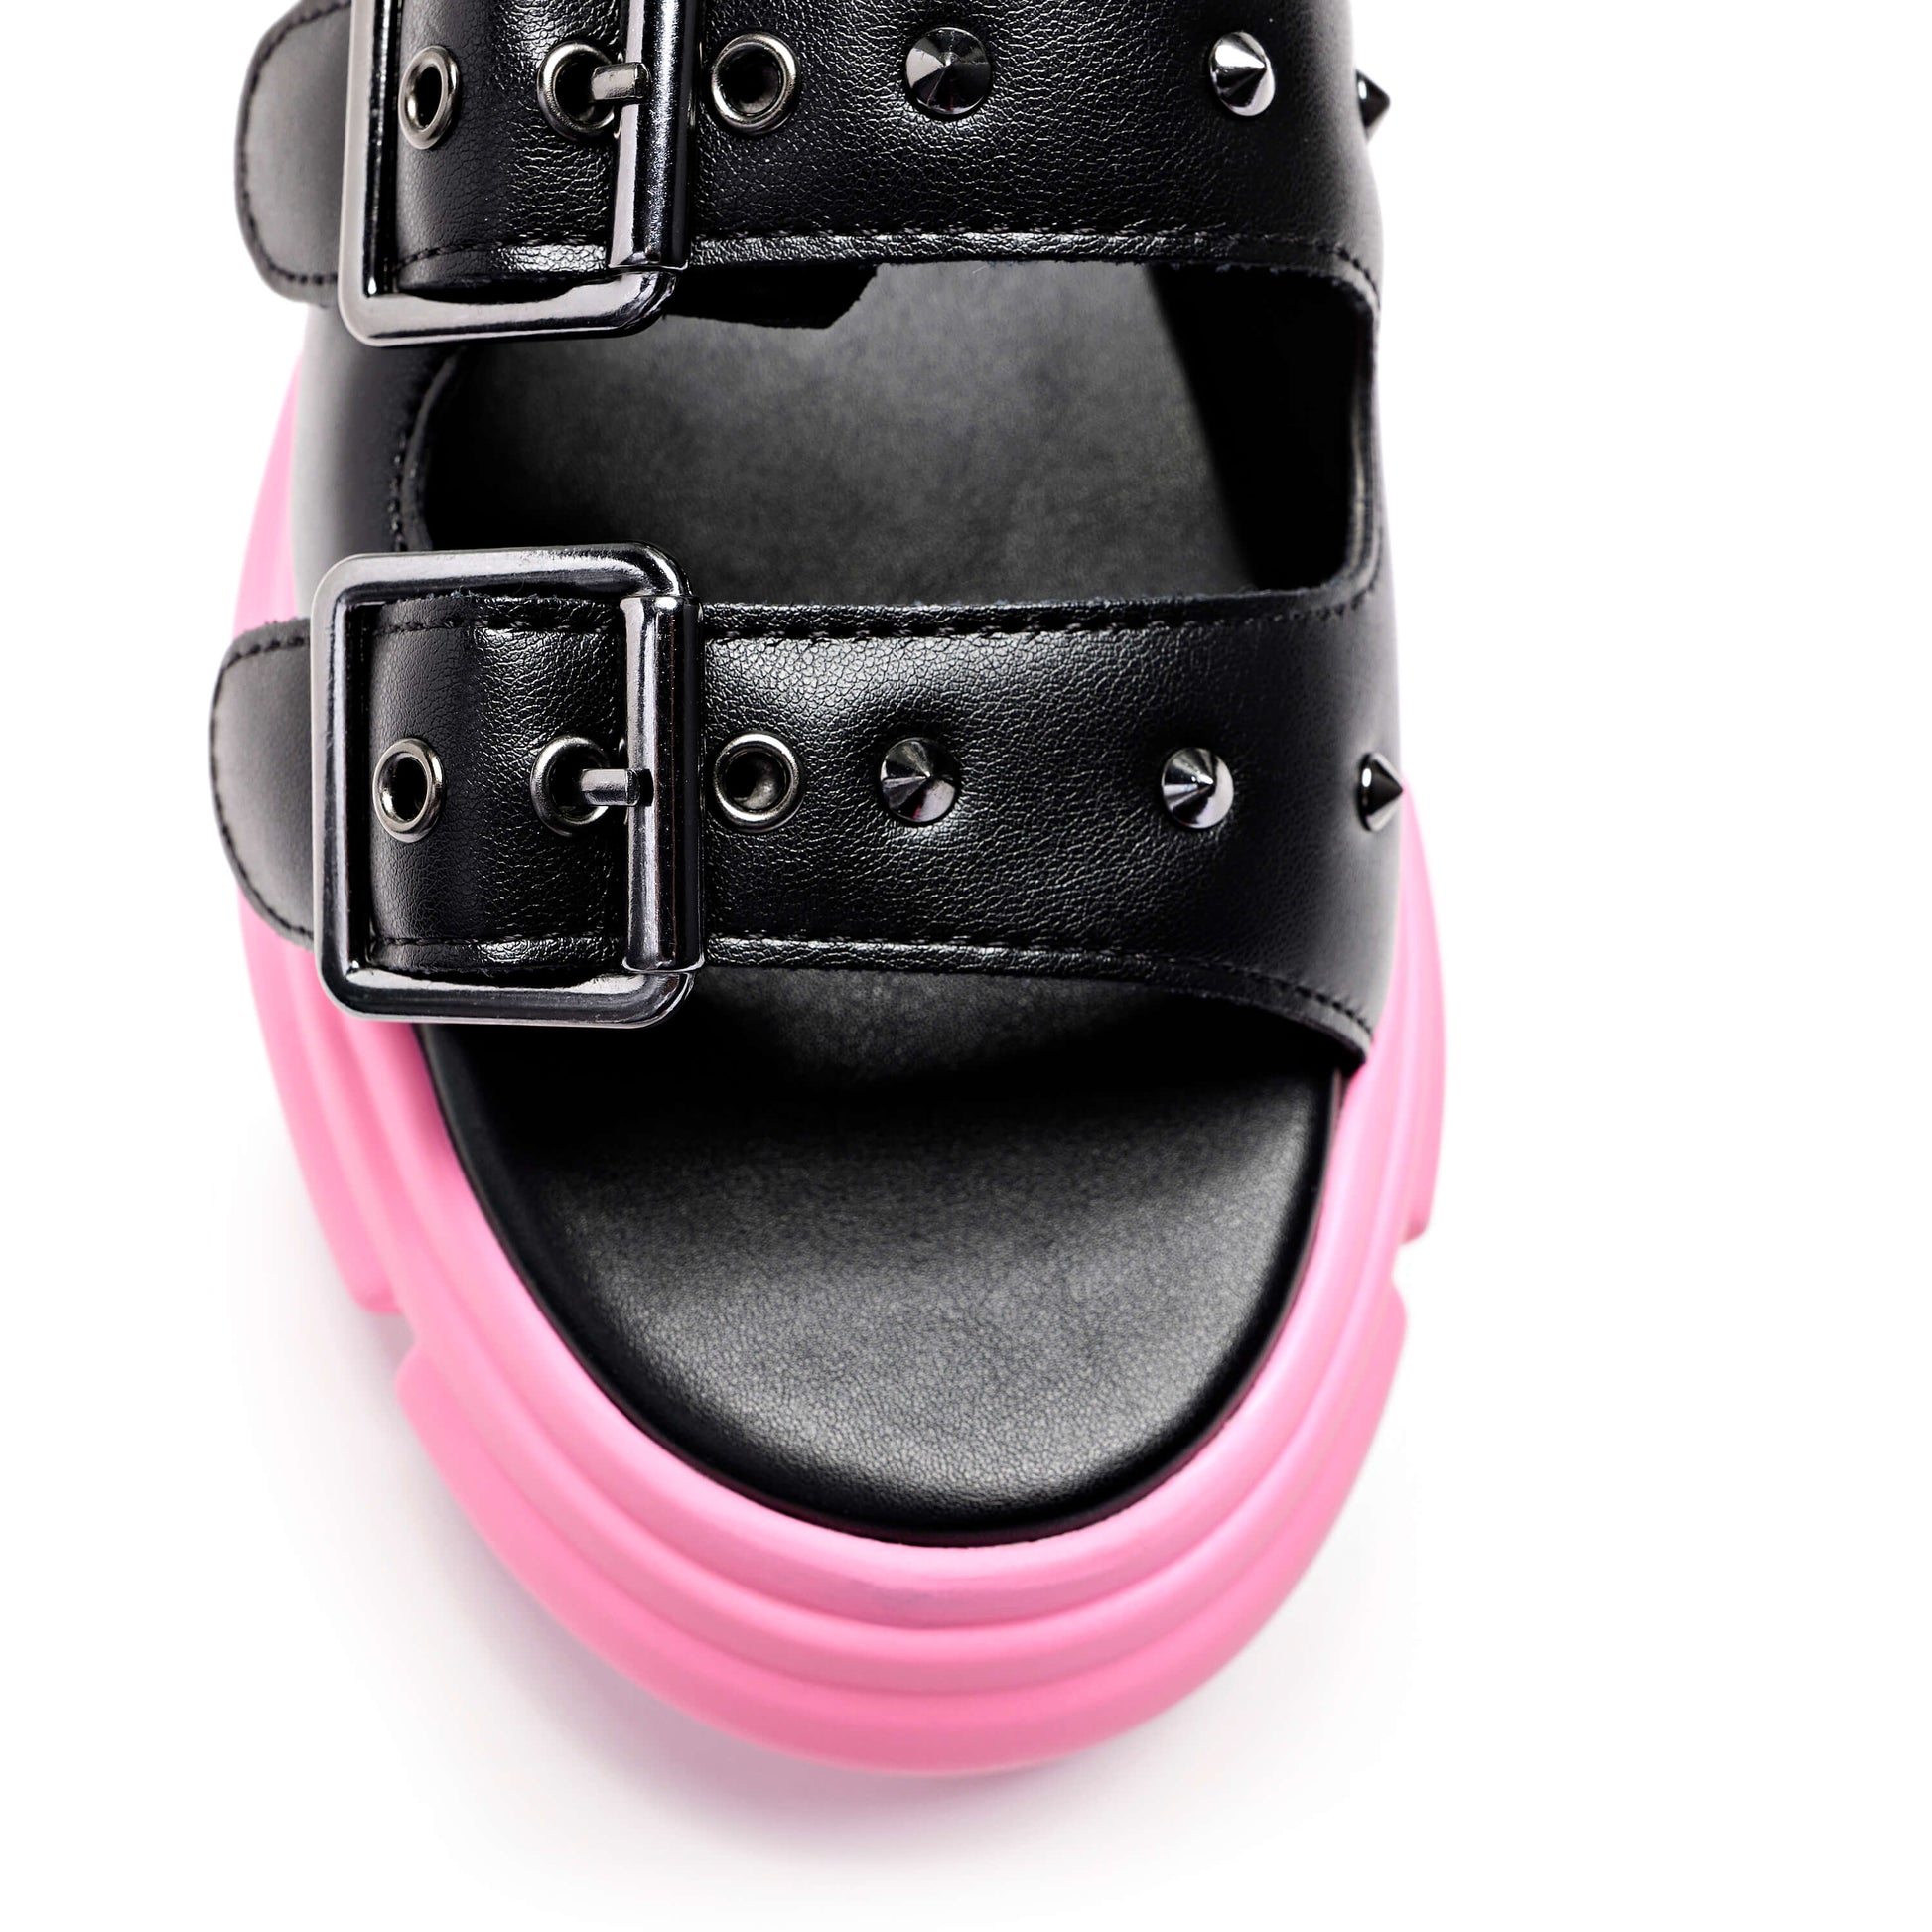 Sticky Secrets Chunky Pink Sandals - Sandals - KOI Footwear - Pink - Top View